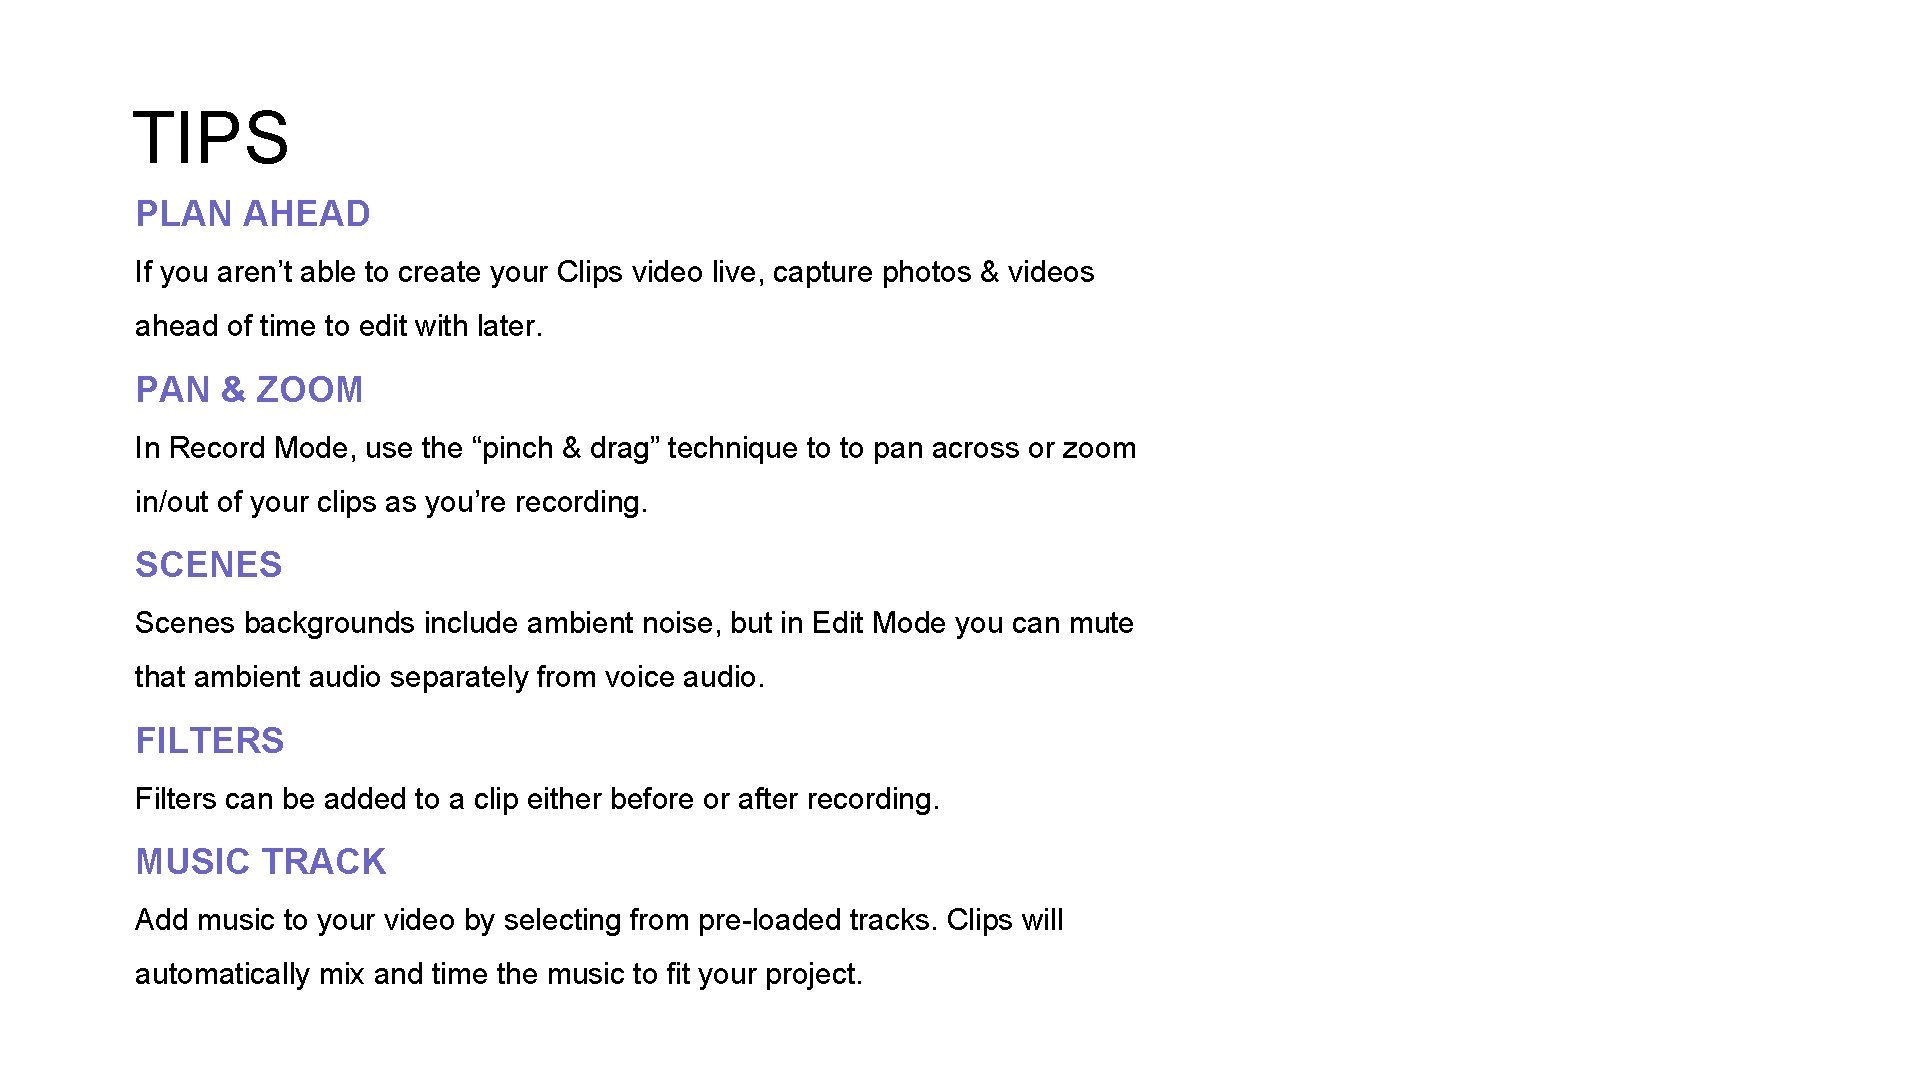 TIPS PLAN AHEAD If you aren’t able to create your Clips video live, capture